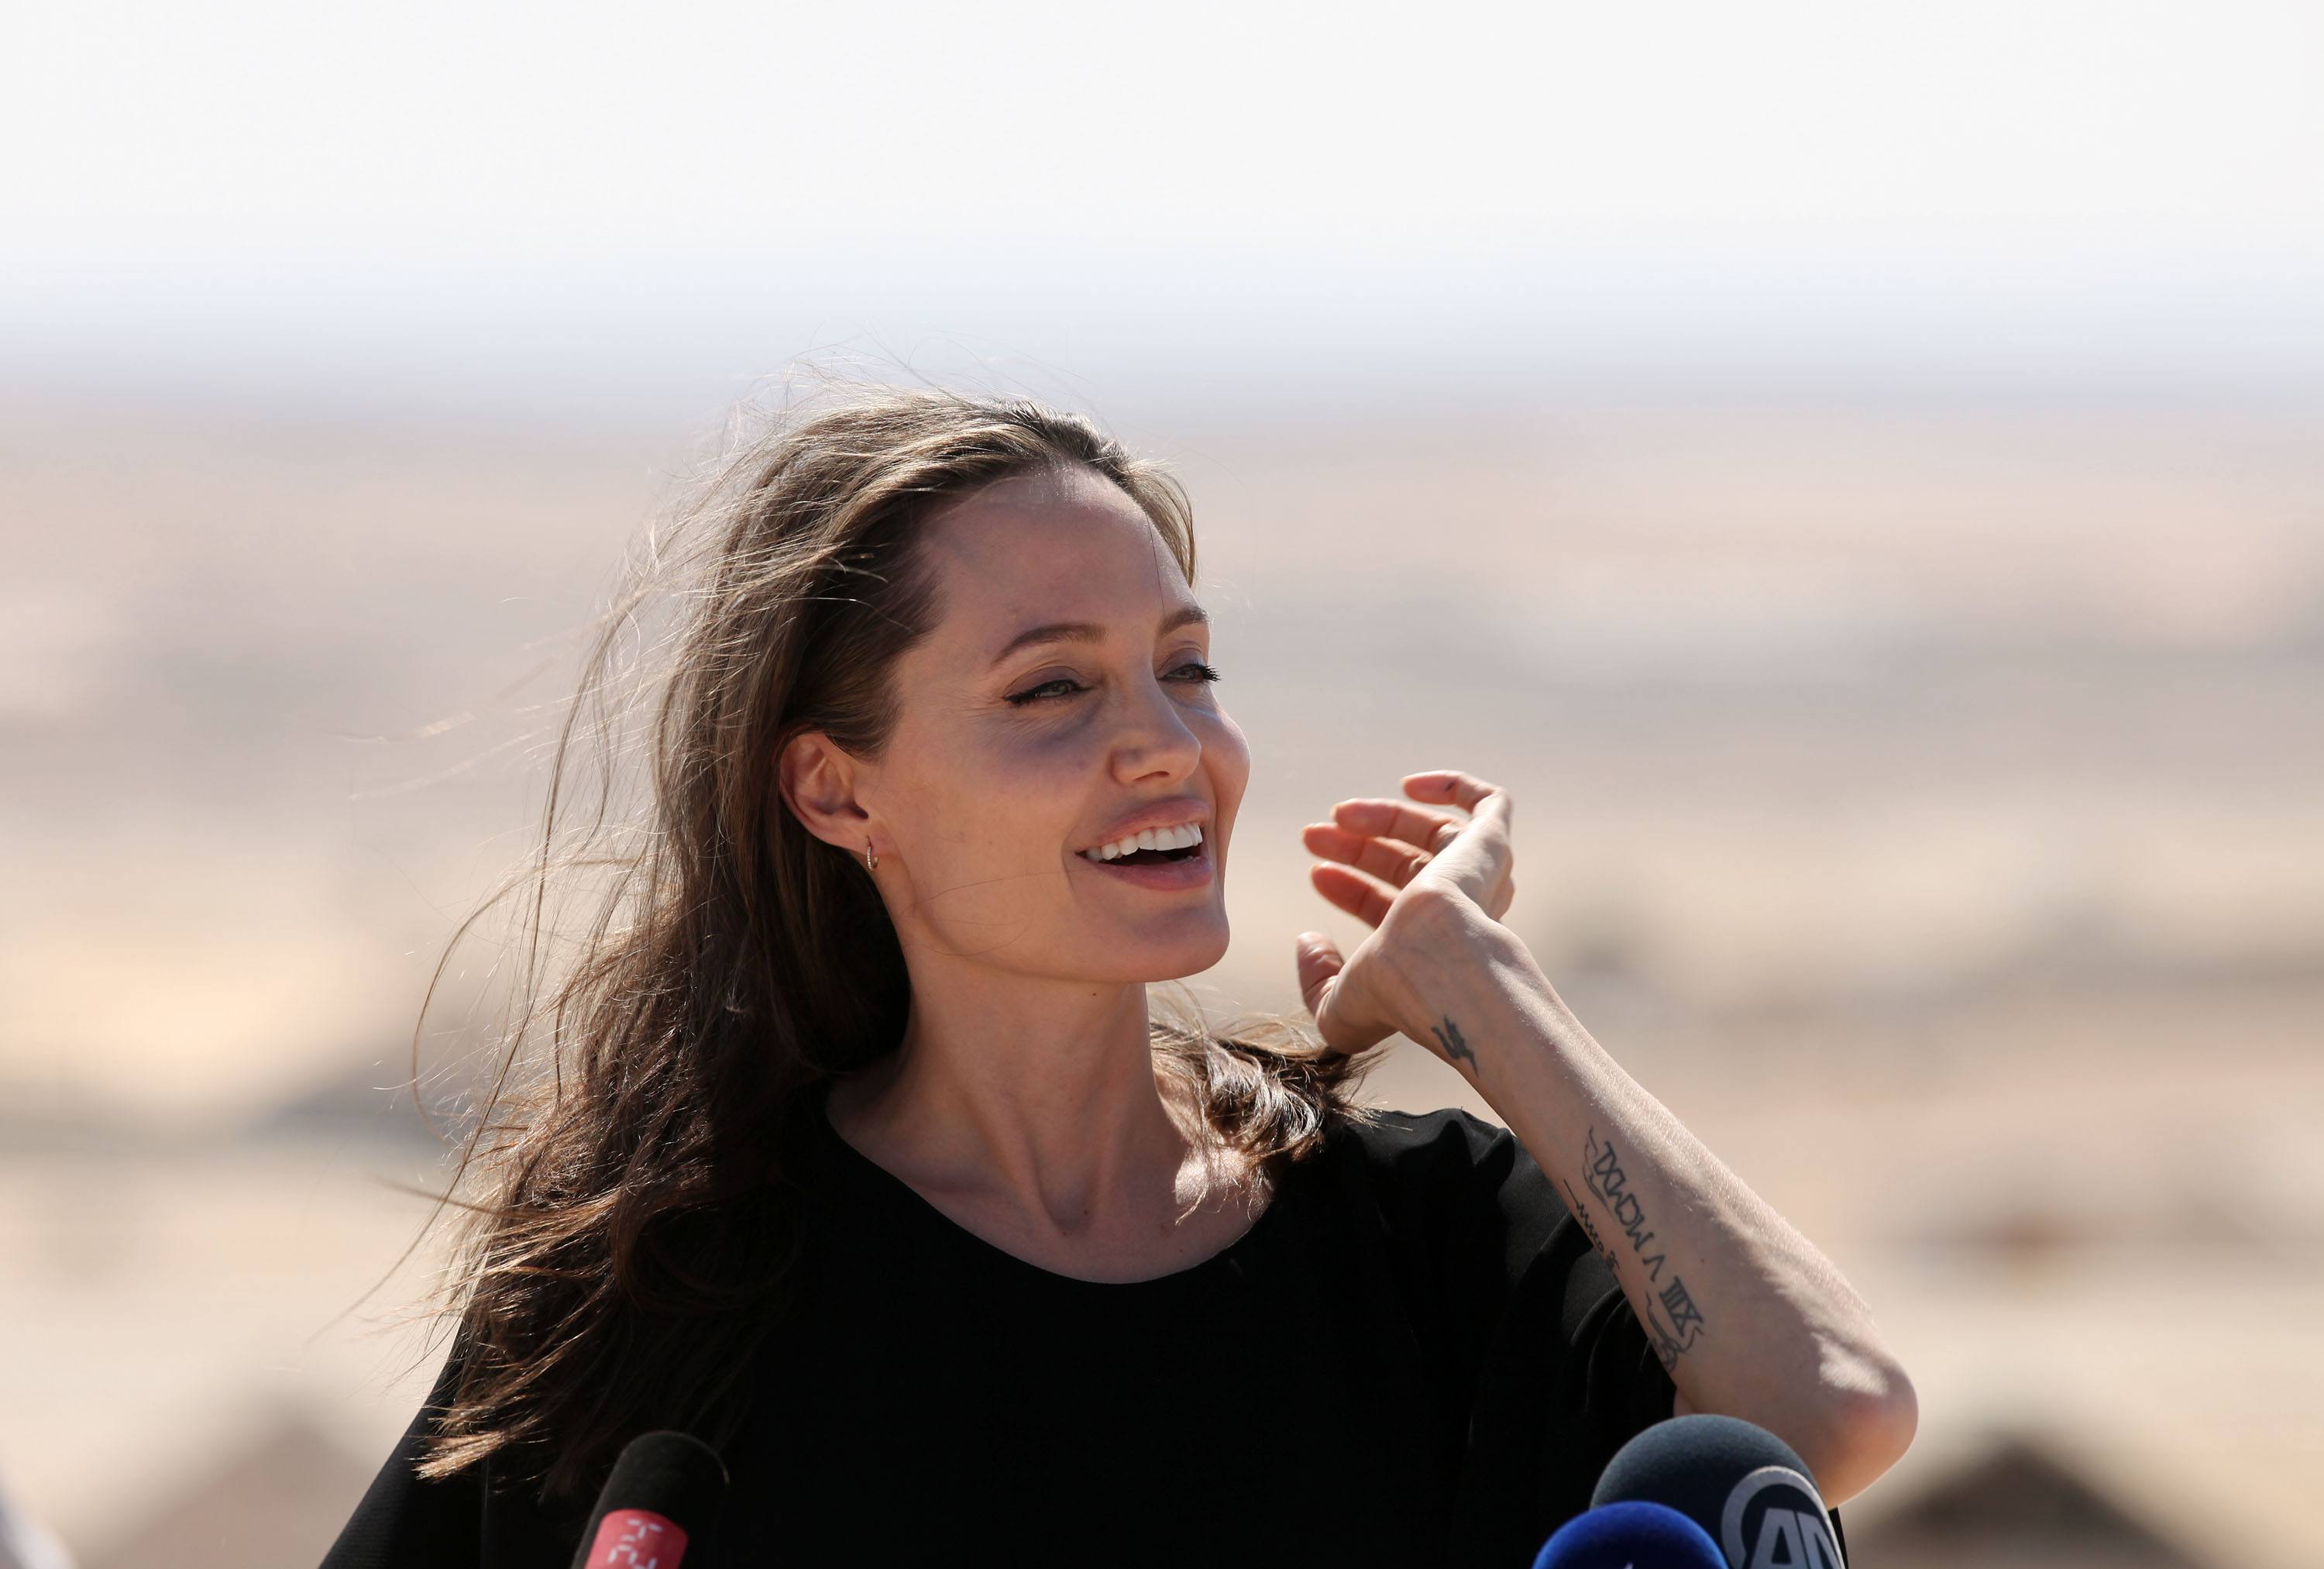 Angelina Jolie holds a press conference at Al- Azraq camp for Syrian refugees on September 9, 2016, in Azraq, Jordan.